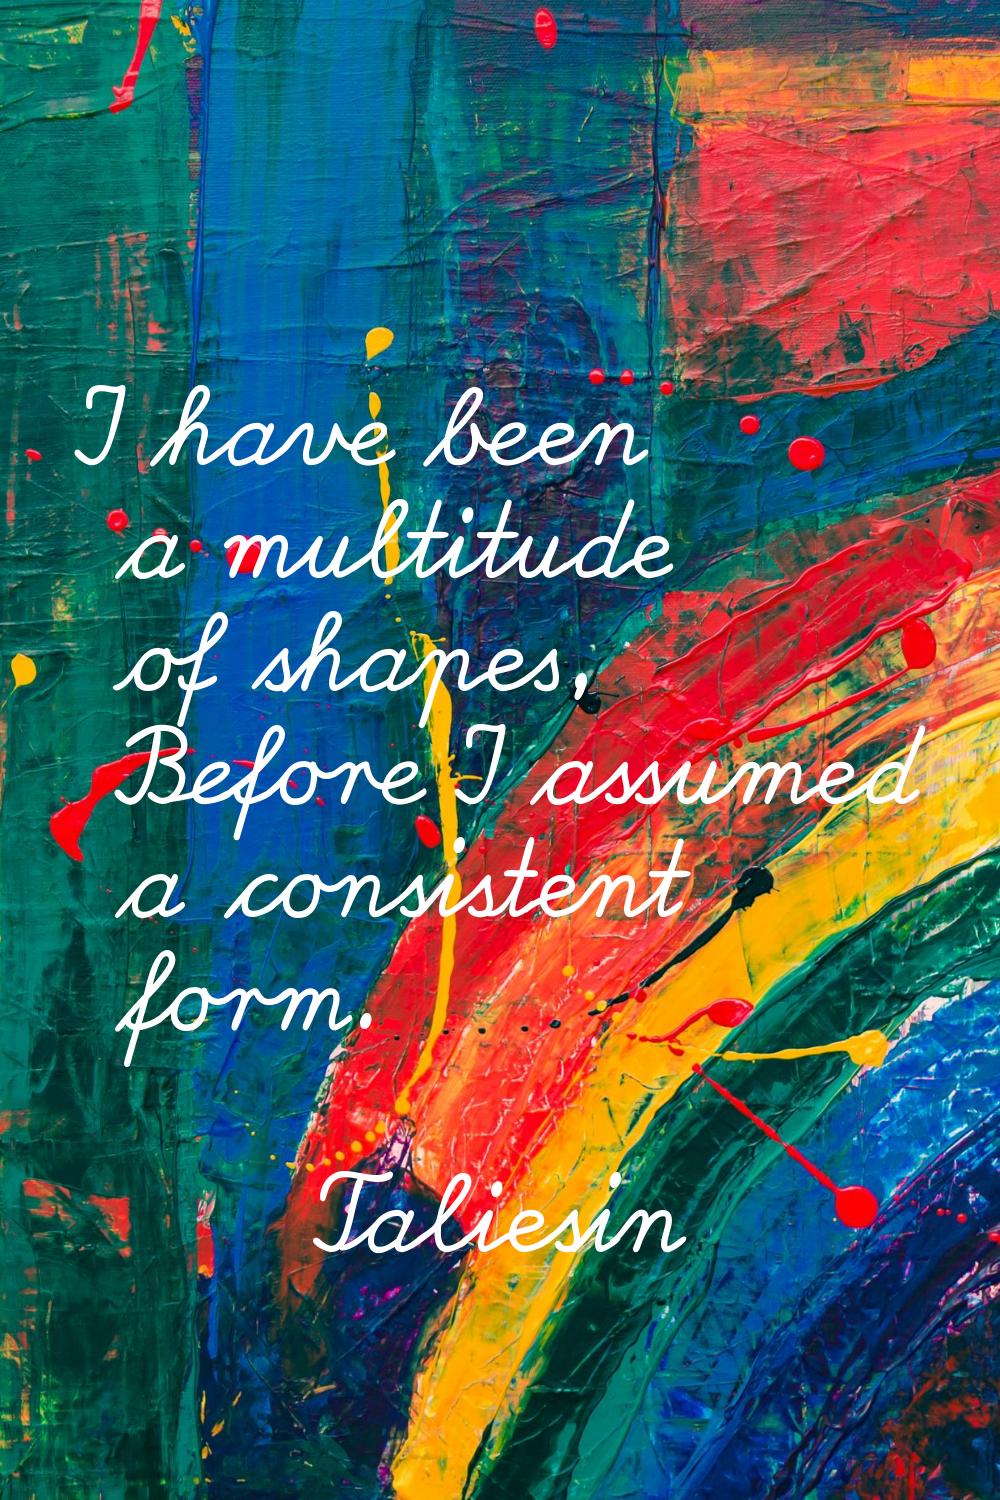 I have been a multitude of shapes, Before I assumed a consistent form.